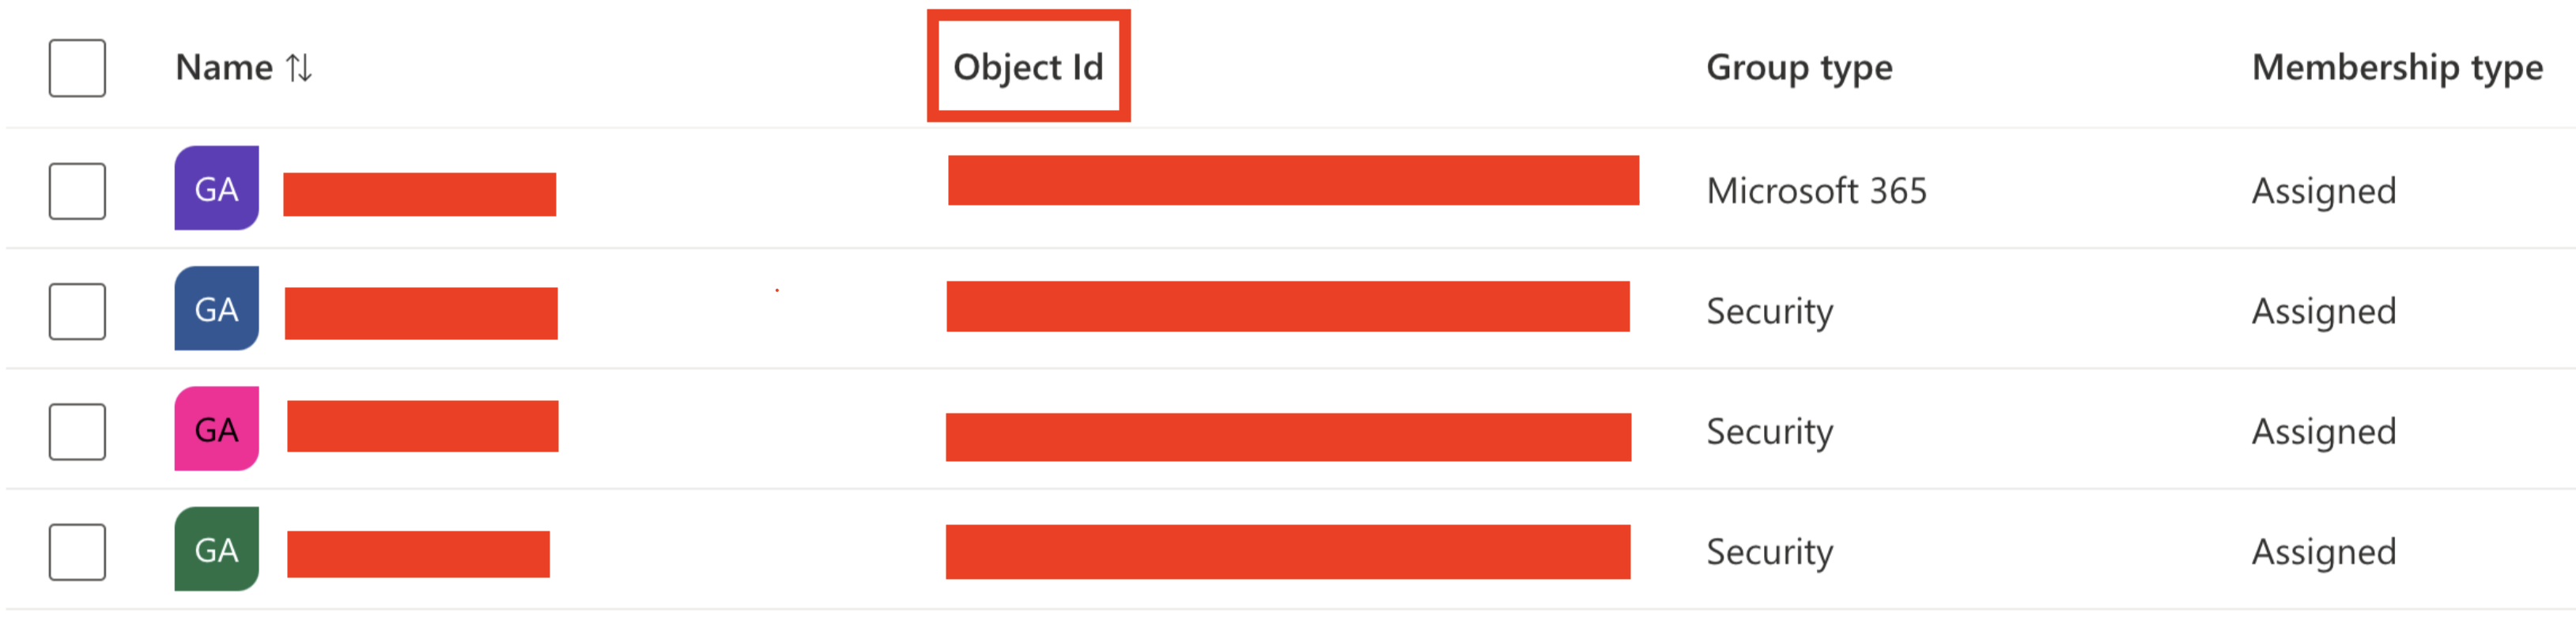 Object Id Column AD Dashboard-1.png